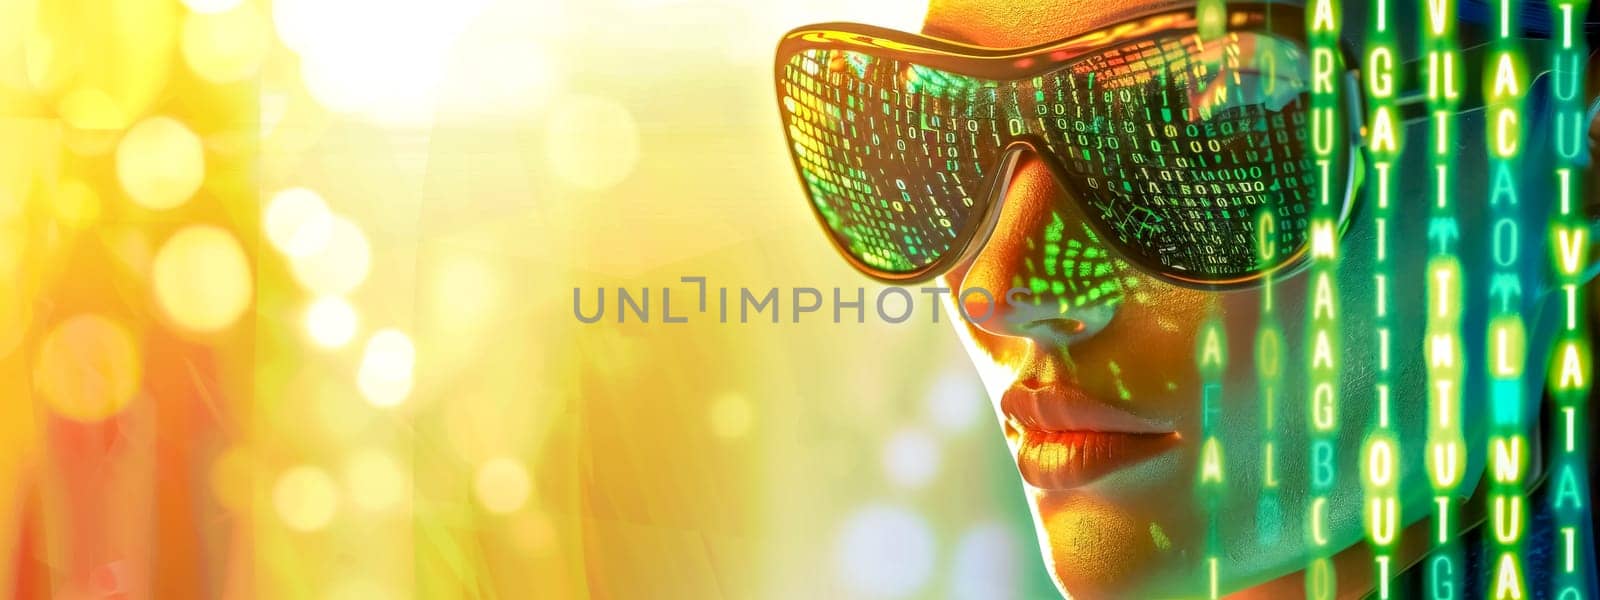 Cutting-edge futuristic technology vision concept with led glasses and cyber-inspired digital data streams for modern tech fashion and gender-neutral style